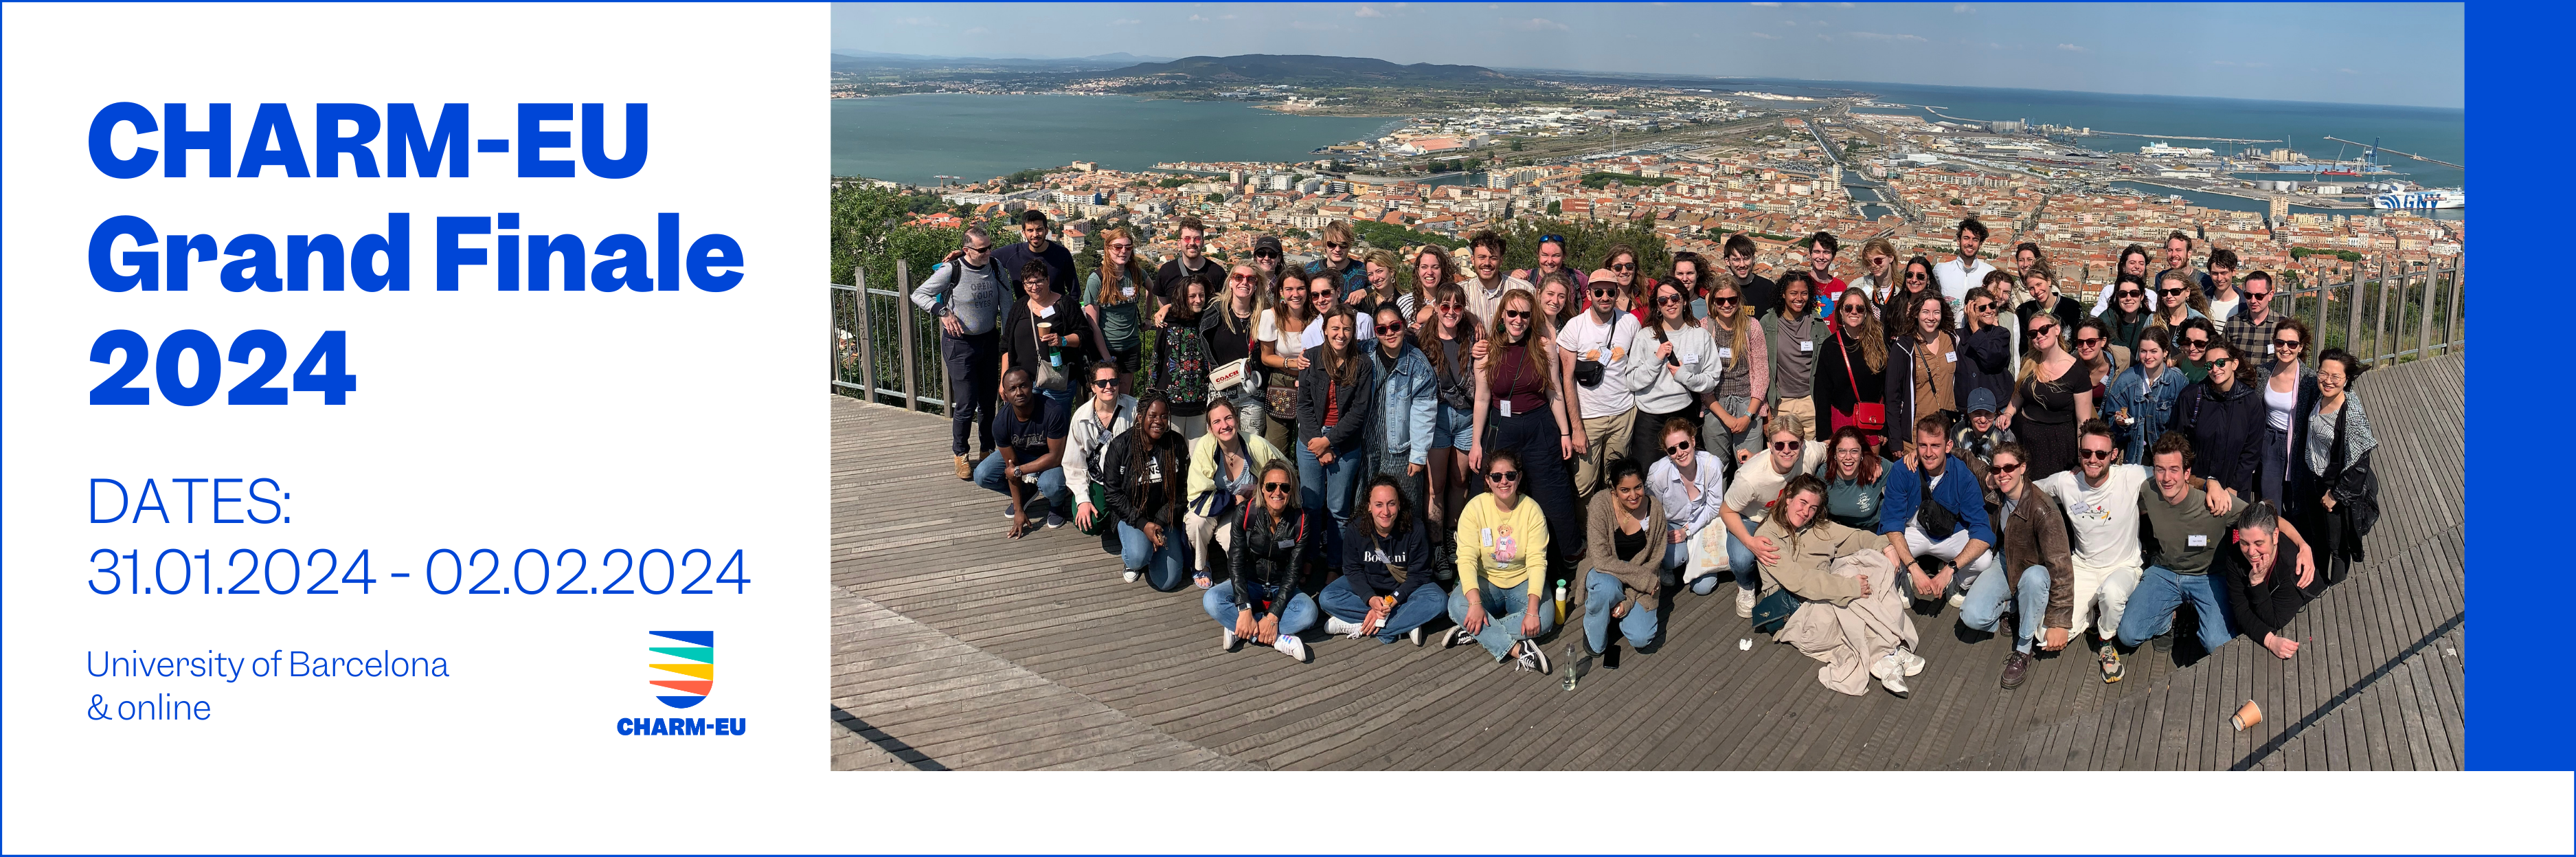 CHARM-EU Grand Finale 2024, Dates: 31/01/2024 - 02/02/2024, University of barcelona and online, CHARM-EYU logo, and a picture of all the students from cohort 2 in Montpellier during the MoXMo